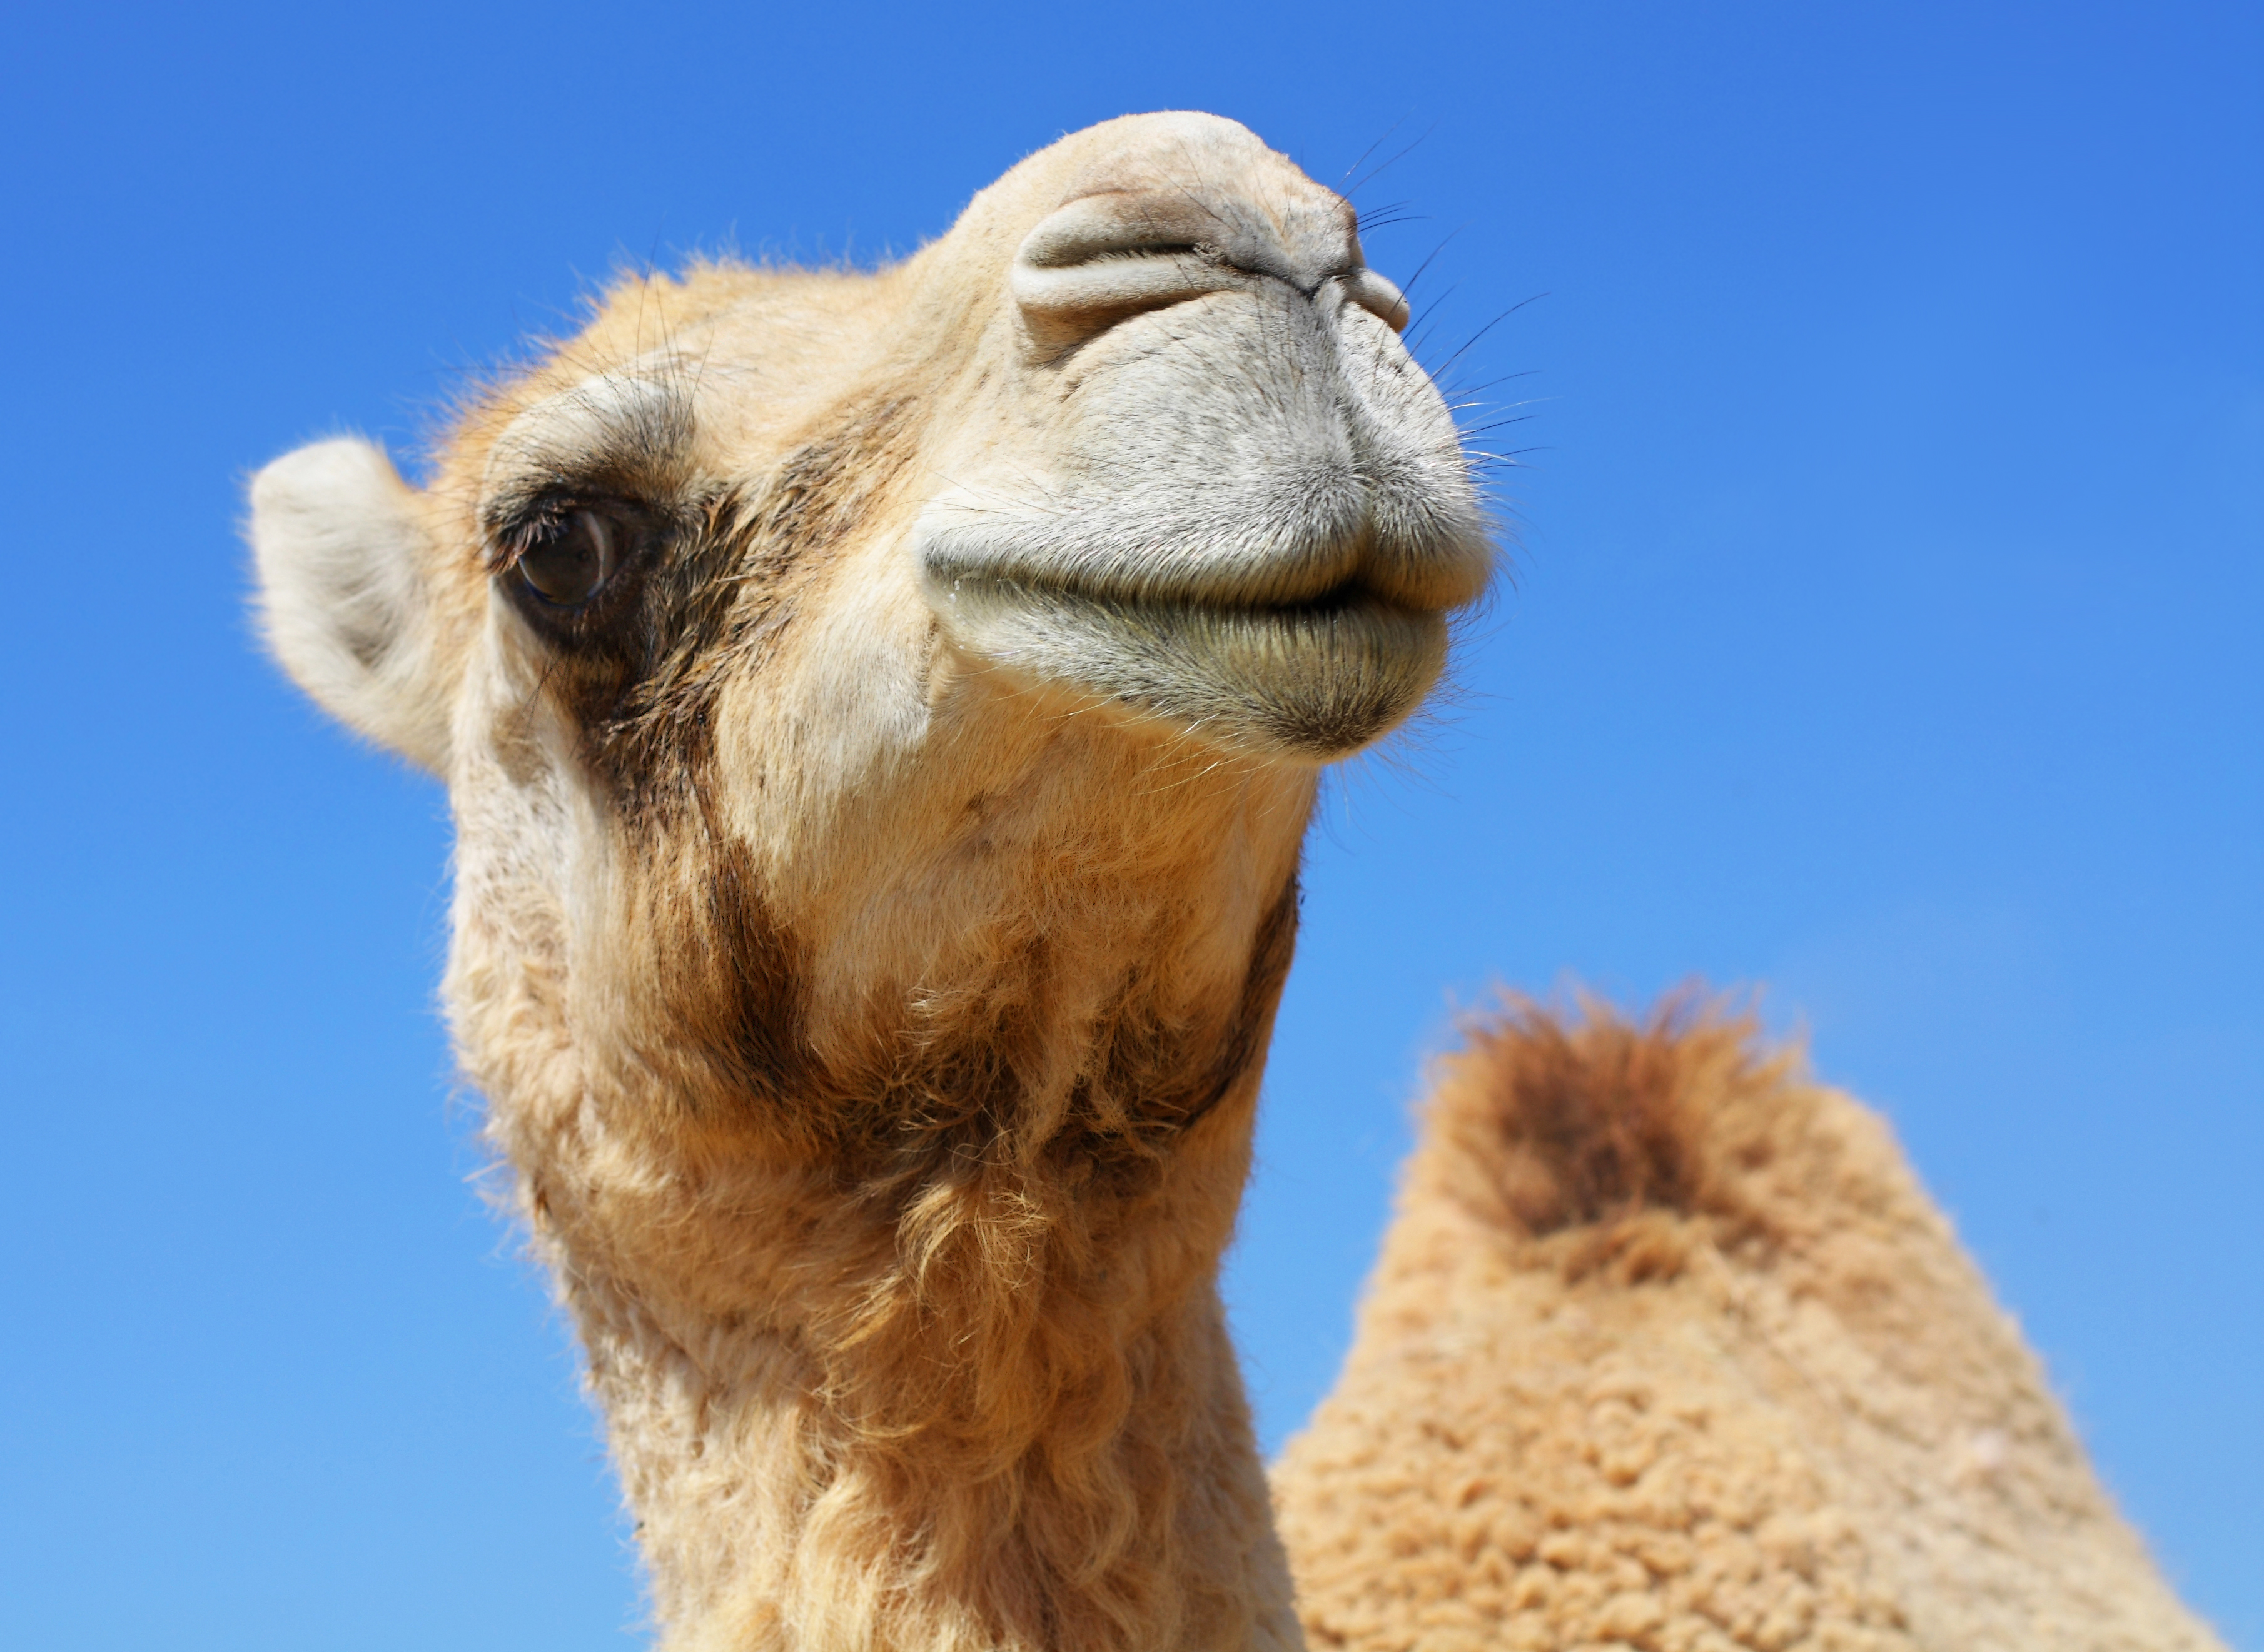 Dozens of camels barred from Saudi beauty contest over Botox.